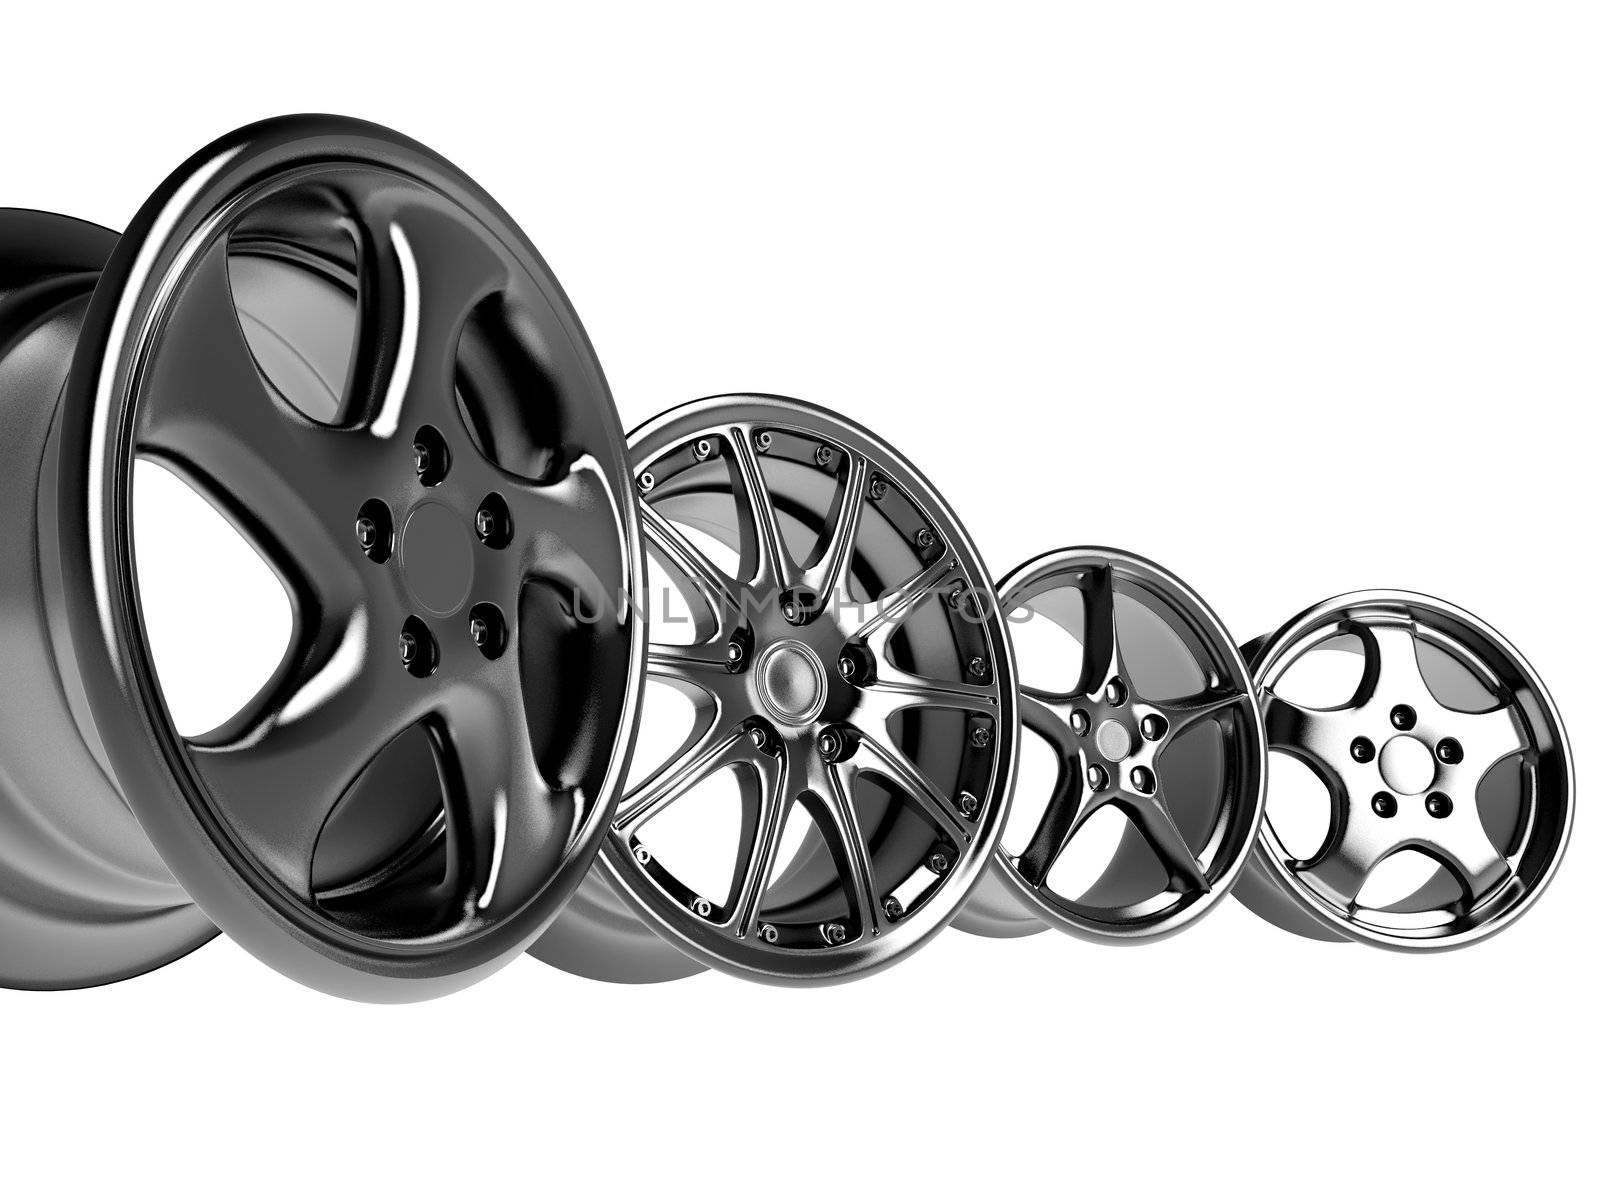 steel alloy car rims over the white background